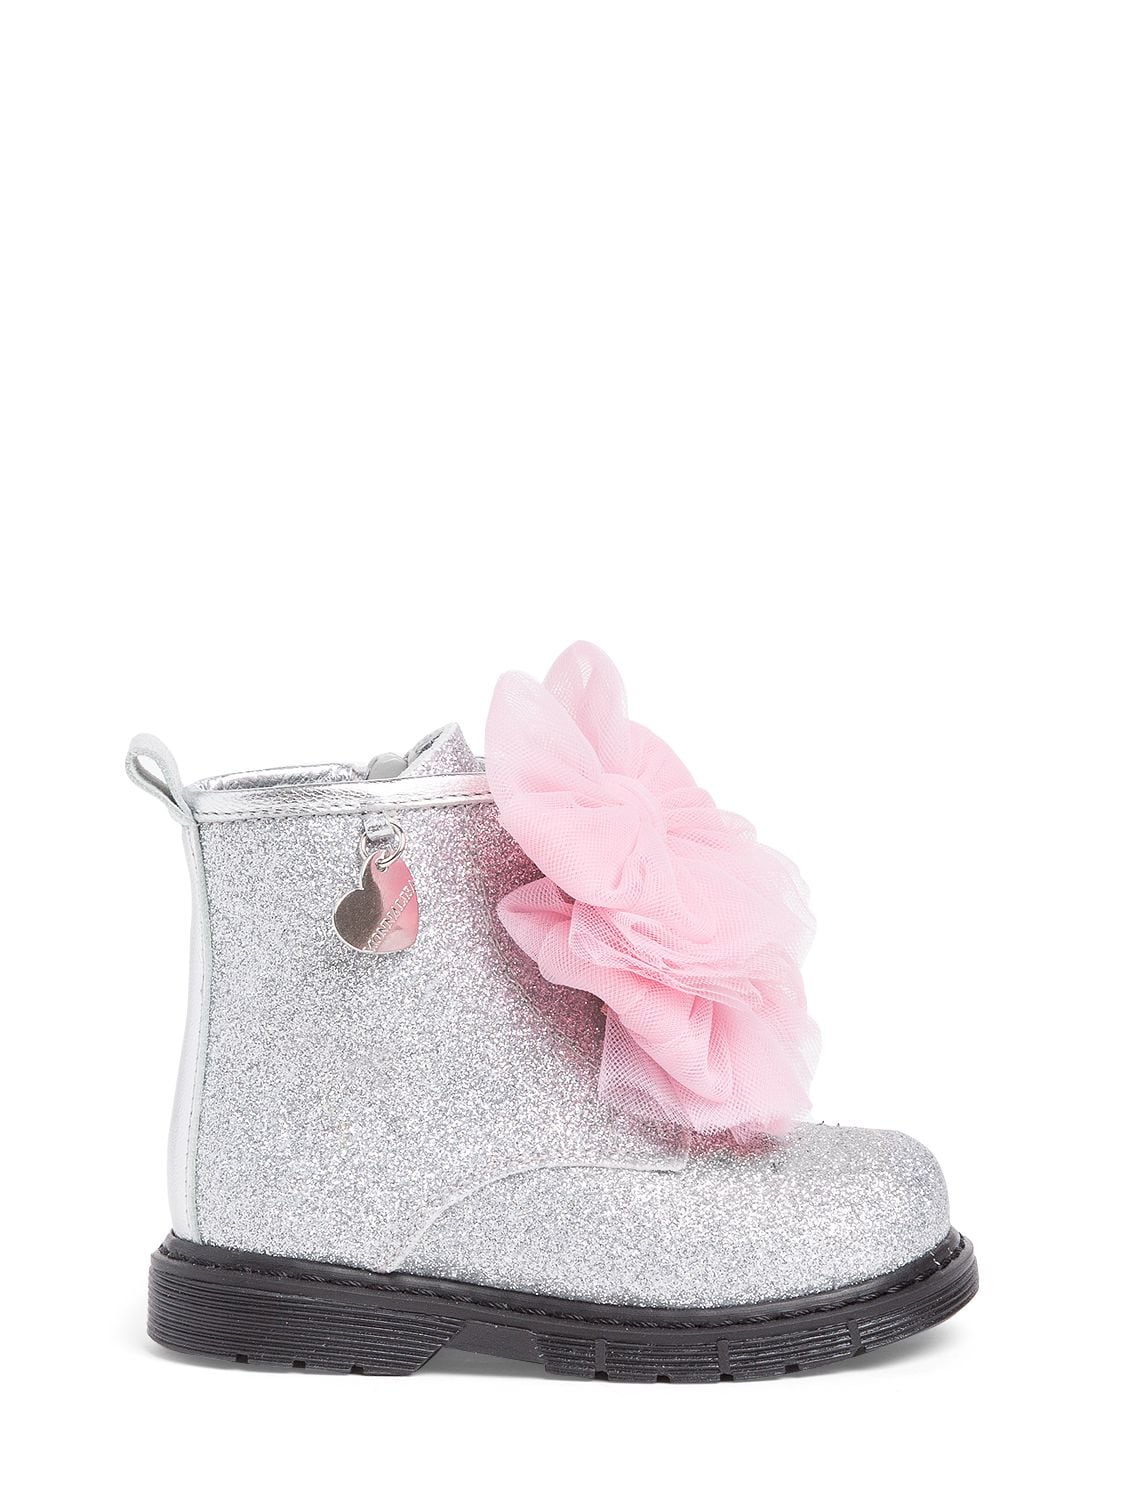 Monnalisa Kids' Glittered Zip-up Boots W/ Tulle Bow In Silver